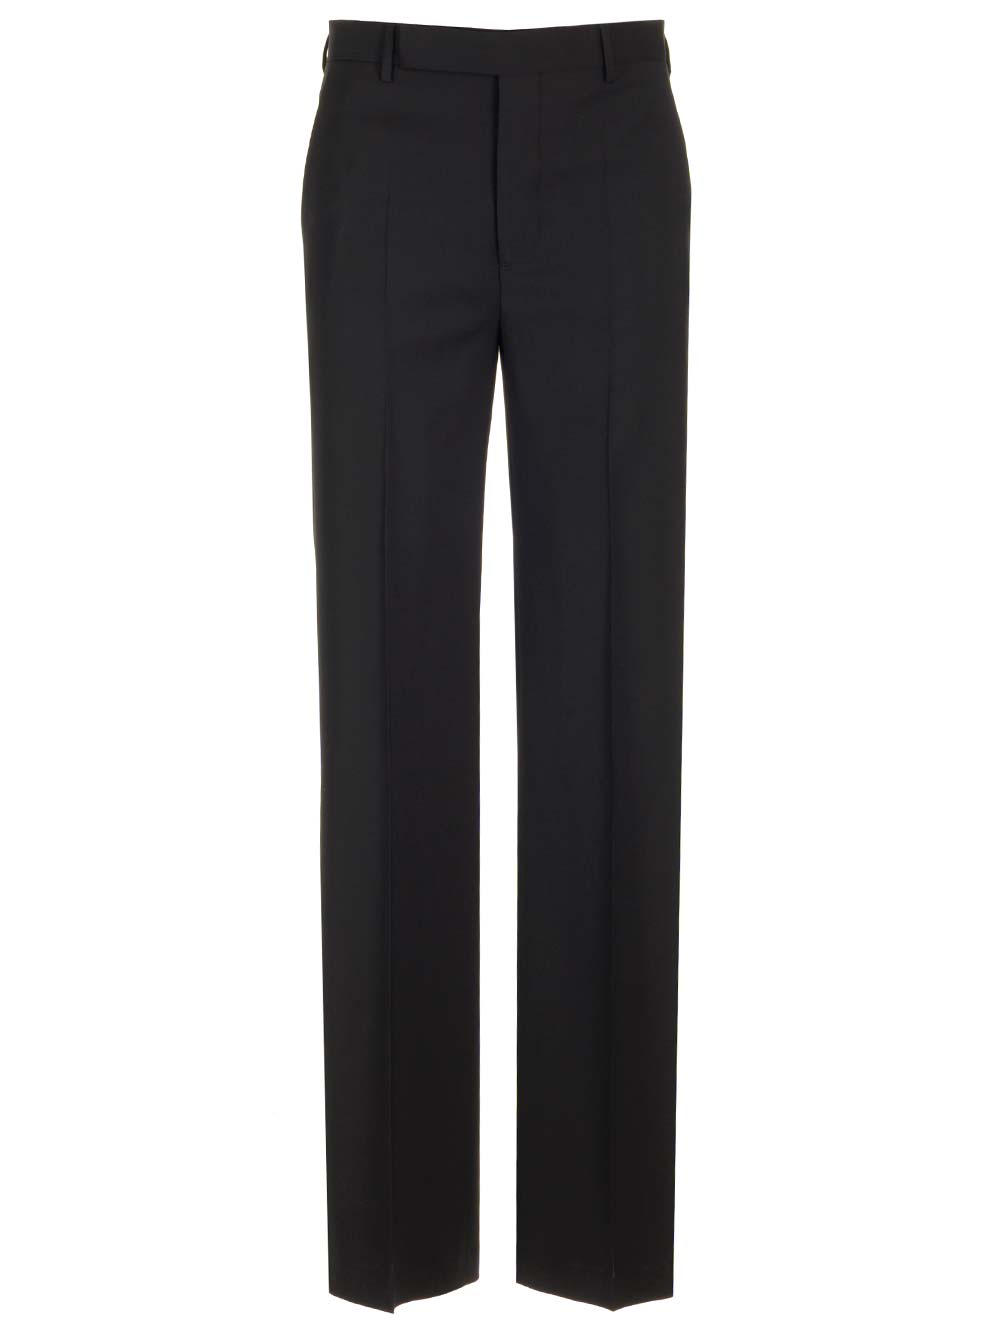 RICK OWENS STRAIGHT WOOL TROUSERS